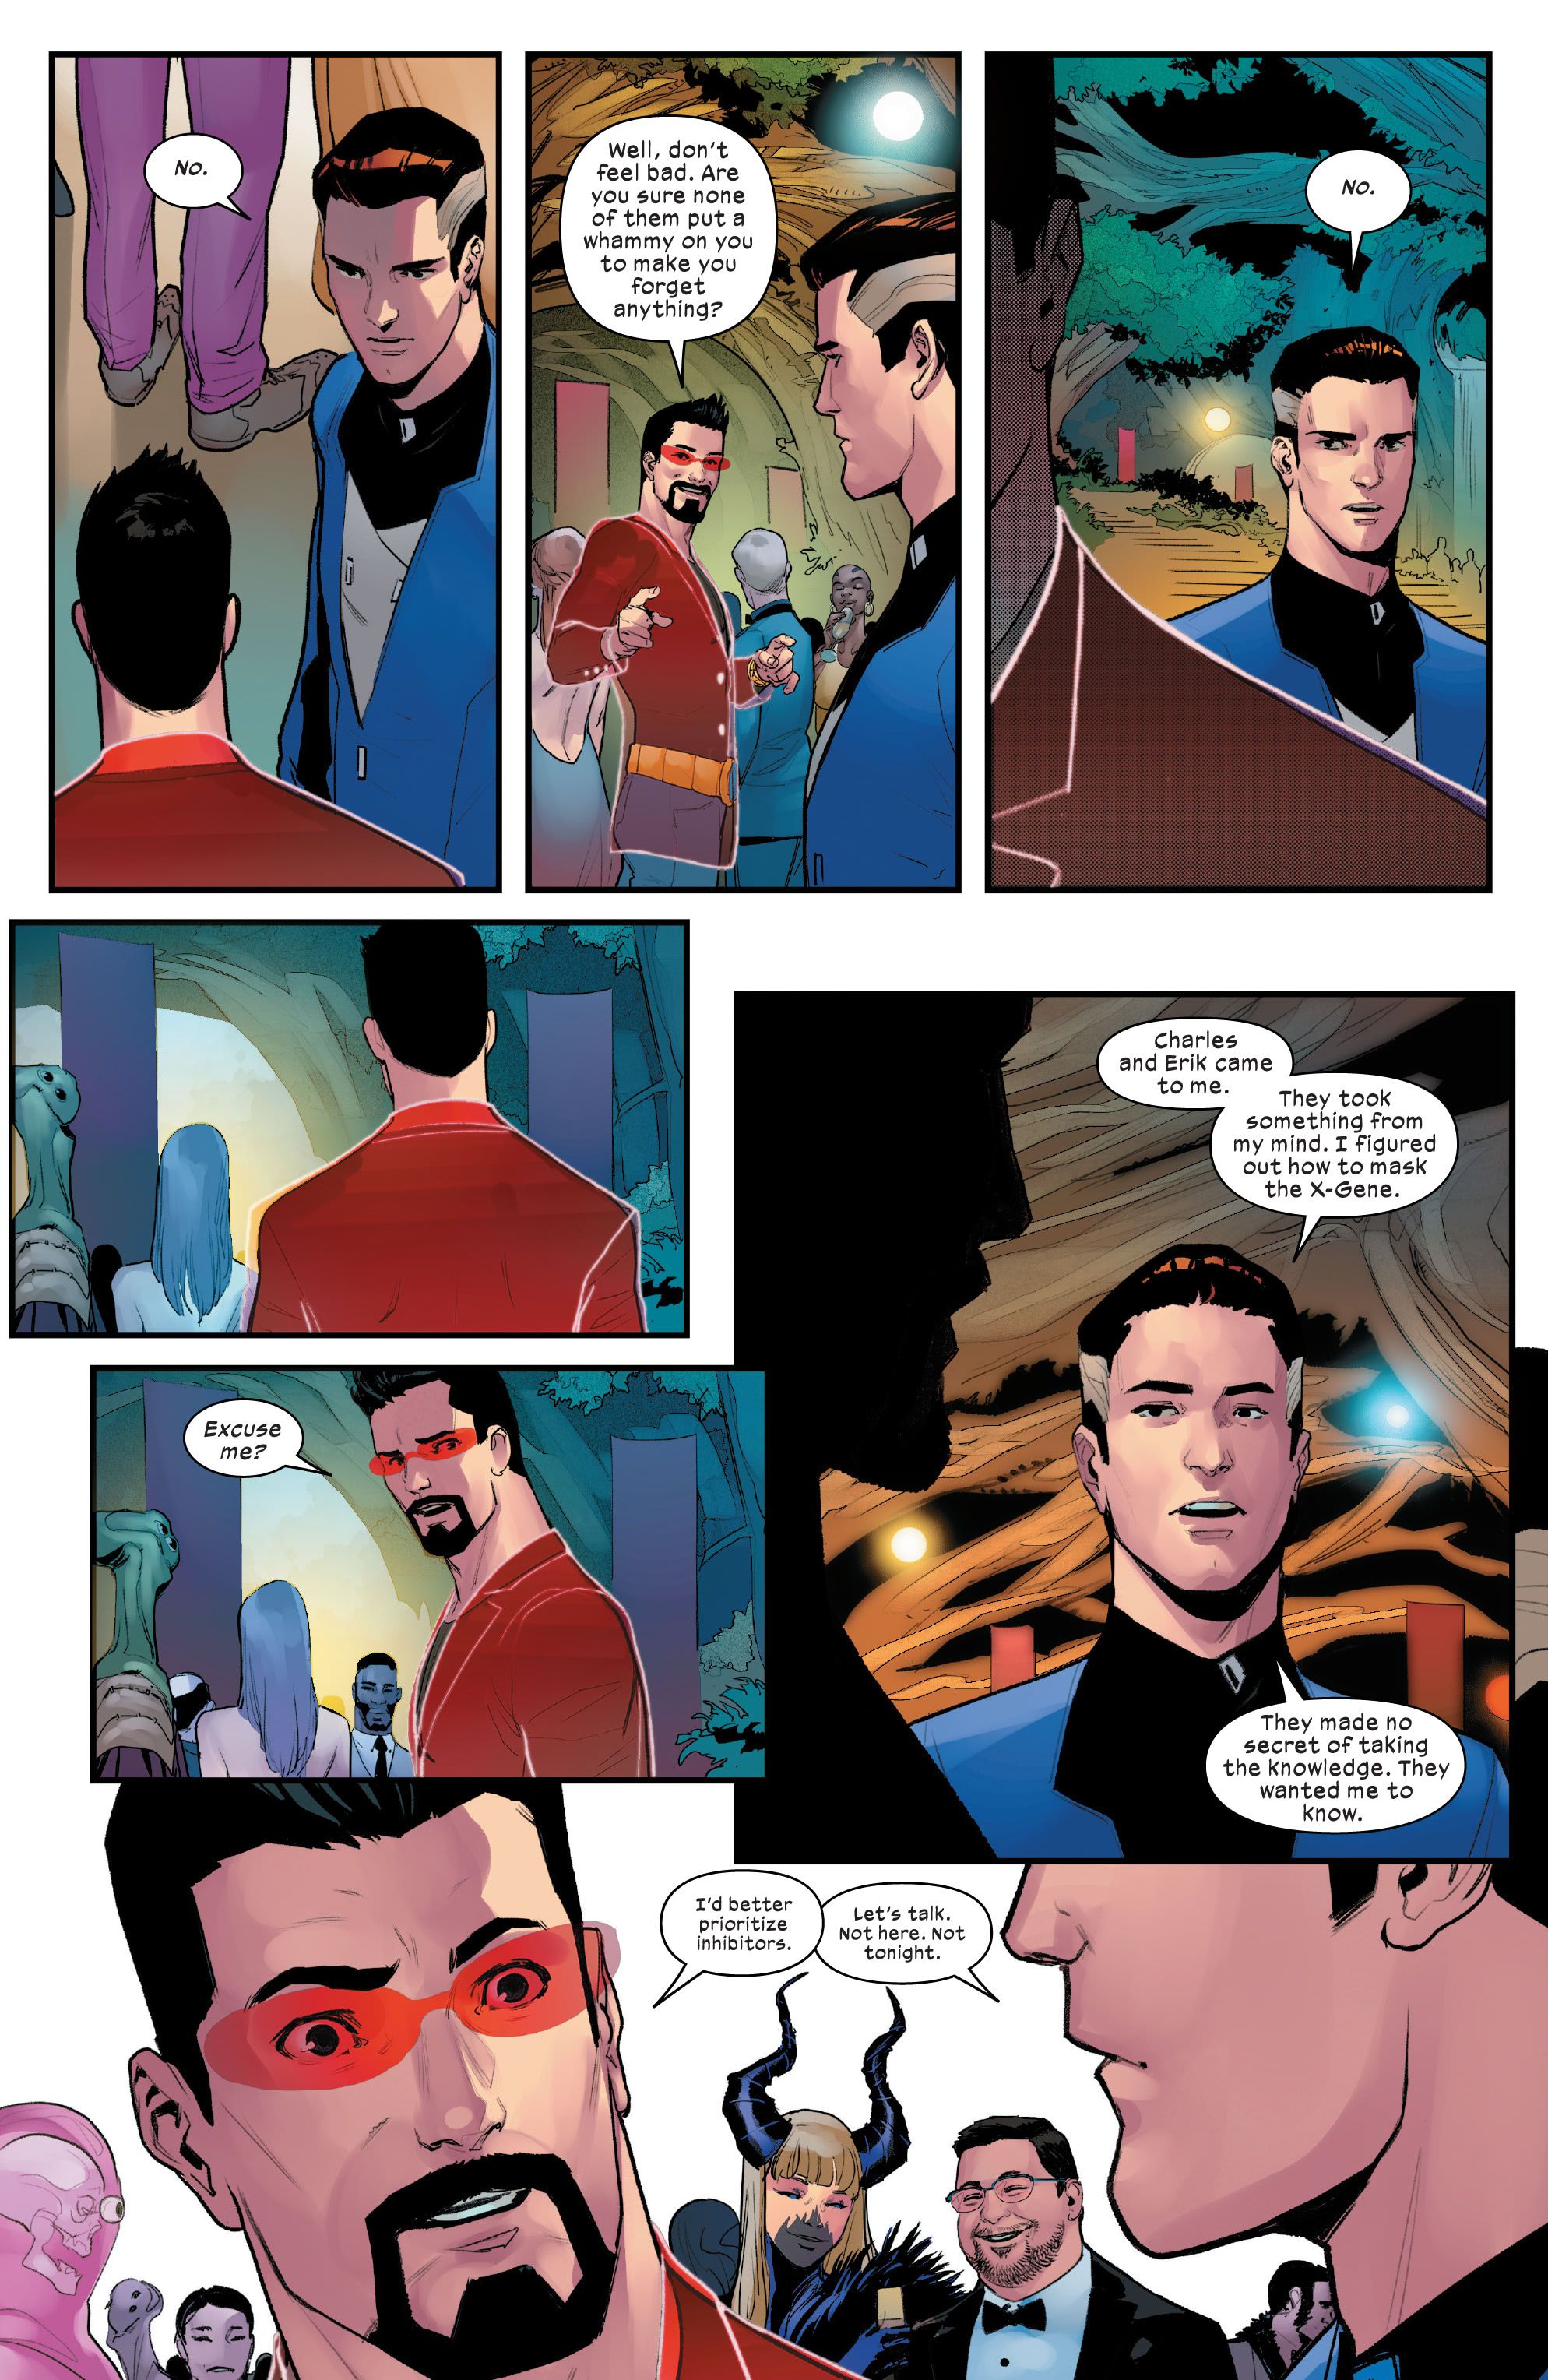 Reed Richards Just Proved Tony Stark Is Smarter in One Huge Way